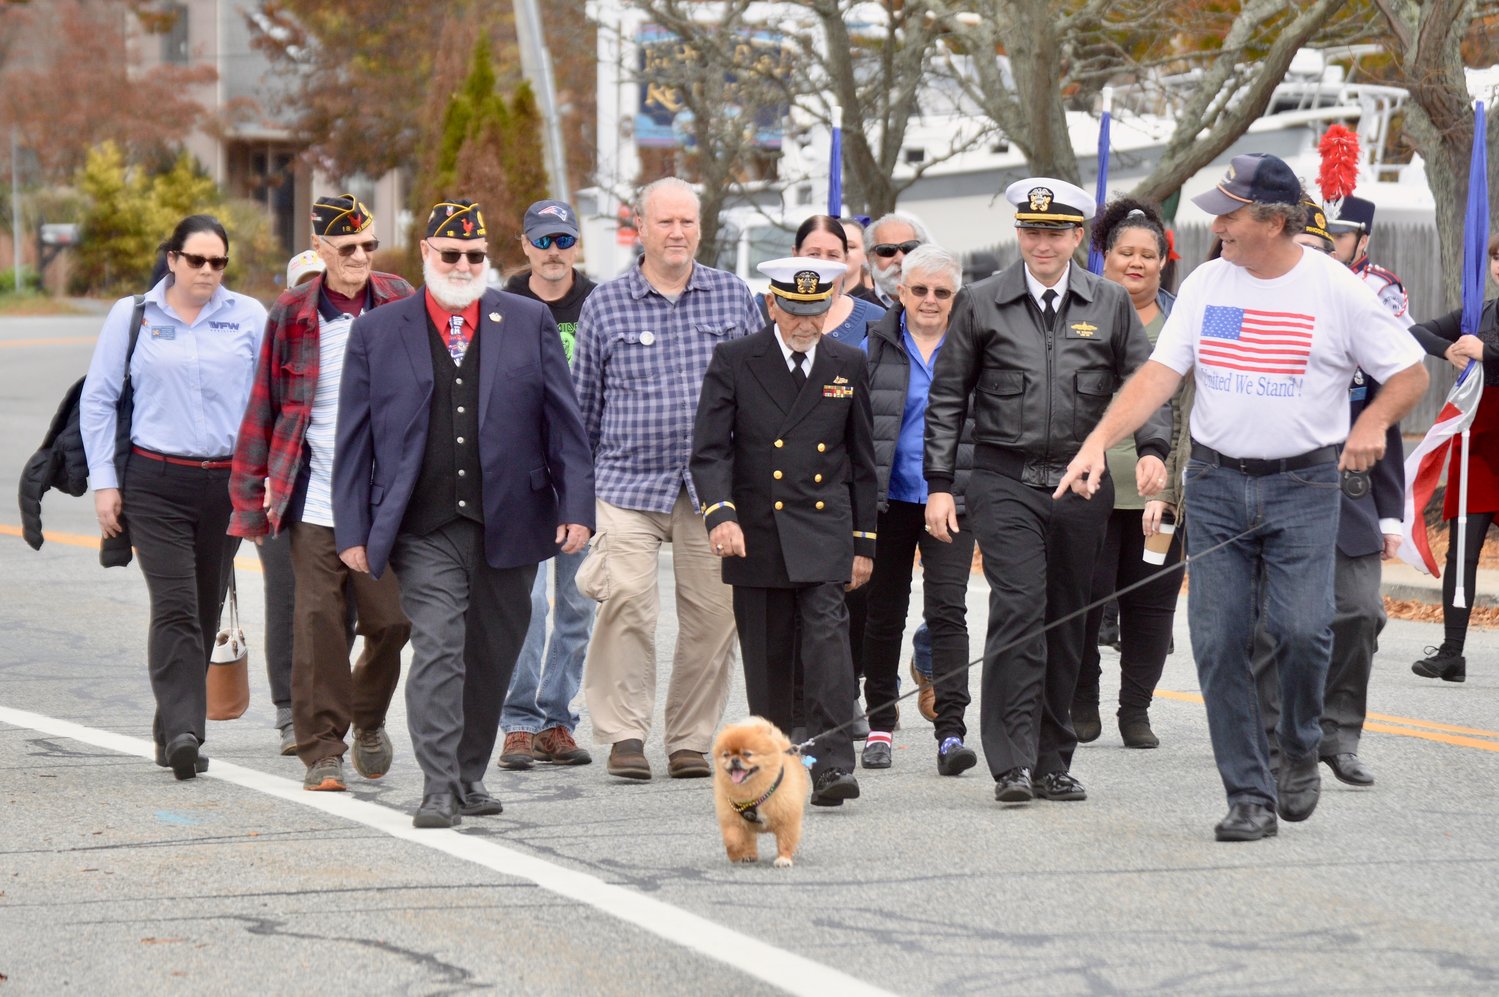 A parade Friday from Stone Bridge leading to Thrive Coffee House was led by veterans, followed by the PHS Marching Band.